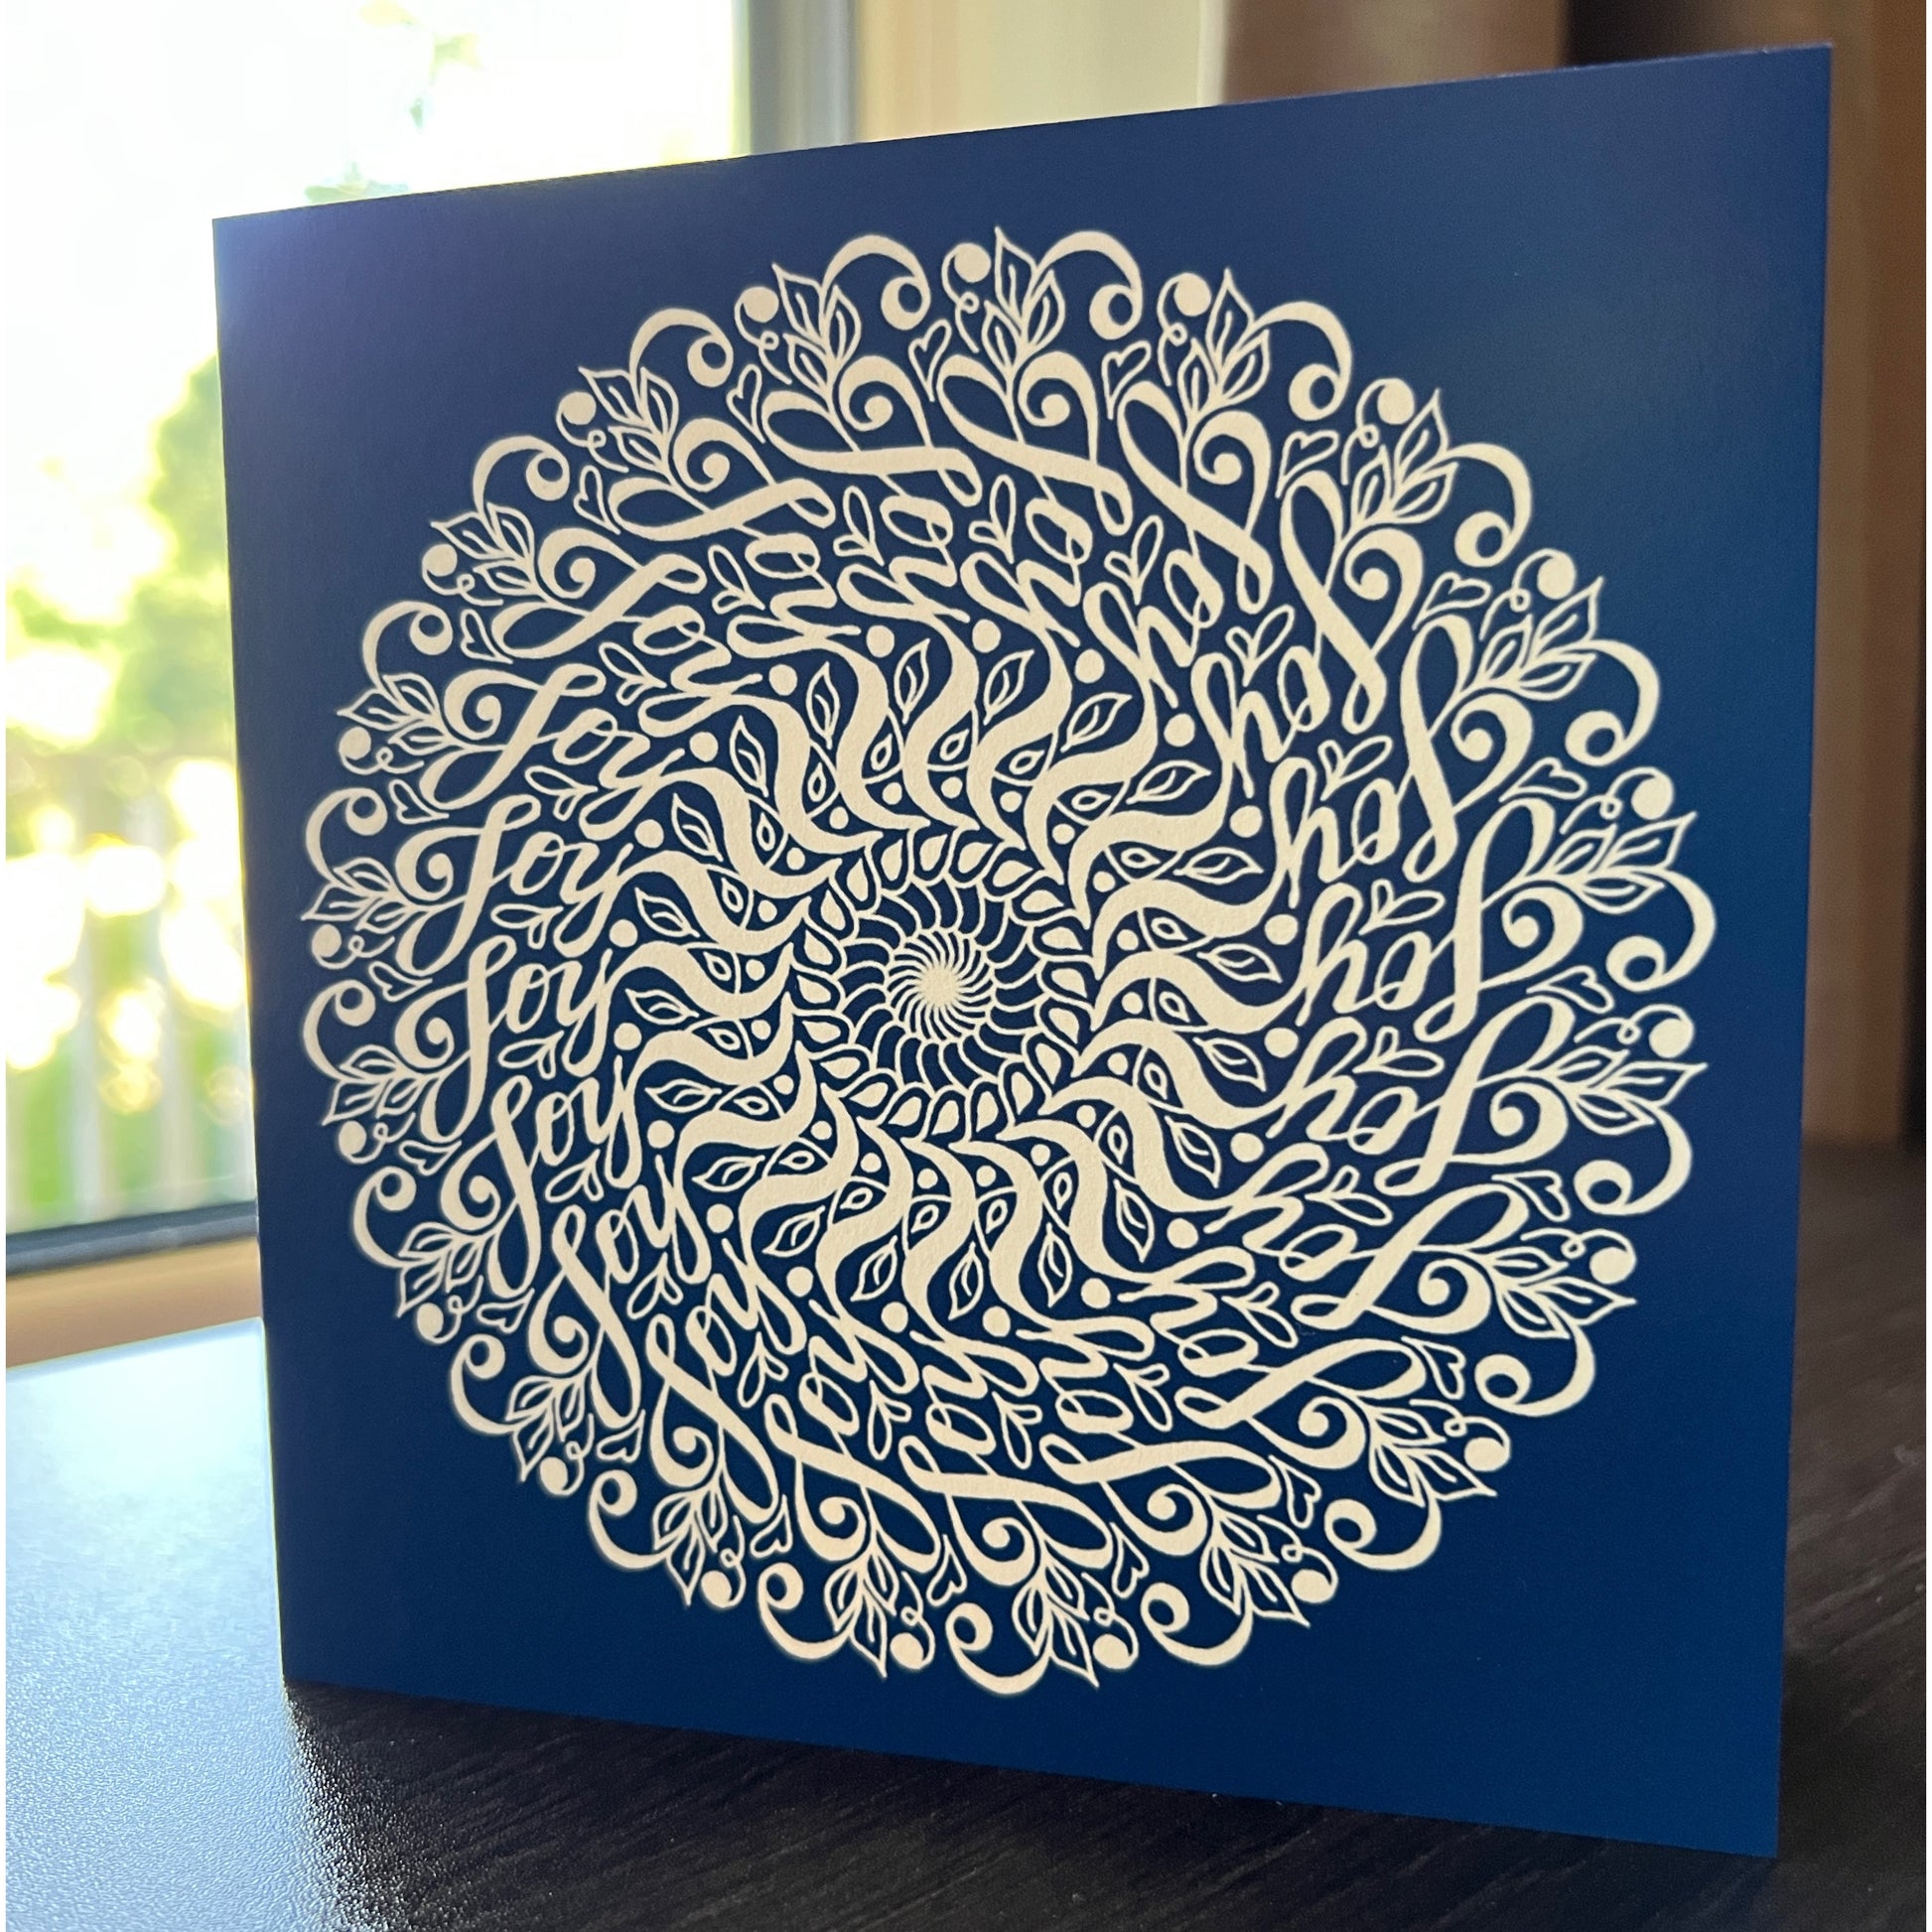 Our "Joy Mandala" greeting card is one of our best sellers and features a deep blue background and a swirling mandala with the hidden word "Joy" incorporated into the design.  You can almost get lost in the movement of this elegant pattern!  This hidden word mandala greeting card is on a desk with a natural background.   Another way to describe it is a hidden message greeting card.  Newwingstudio.com